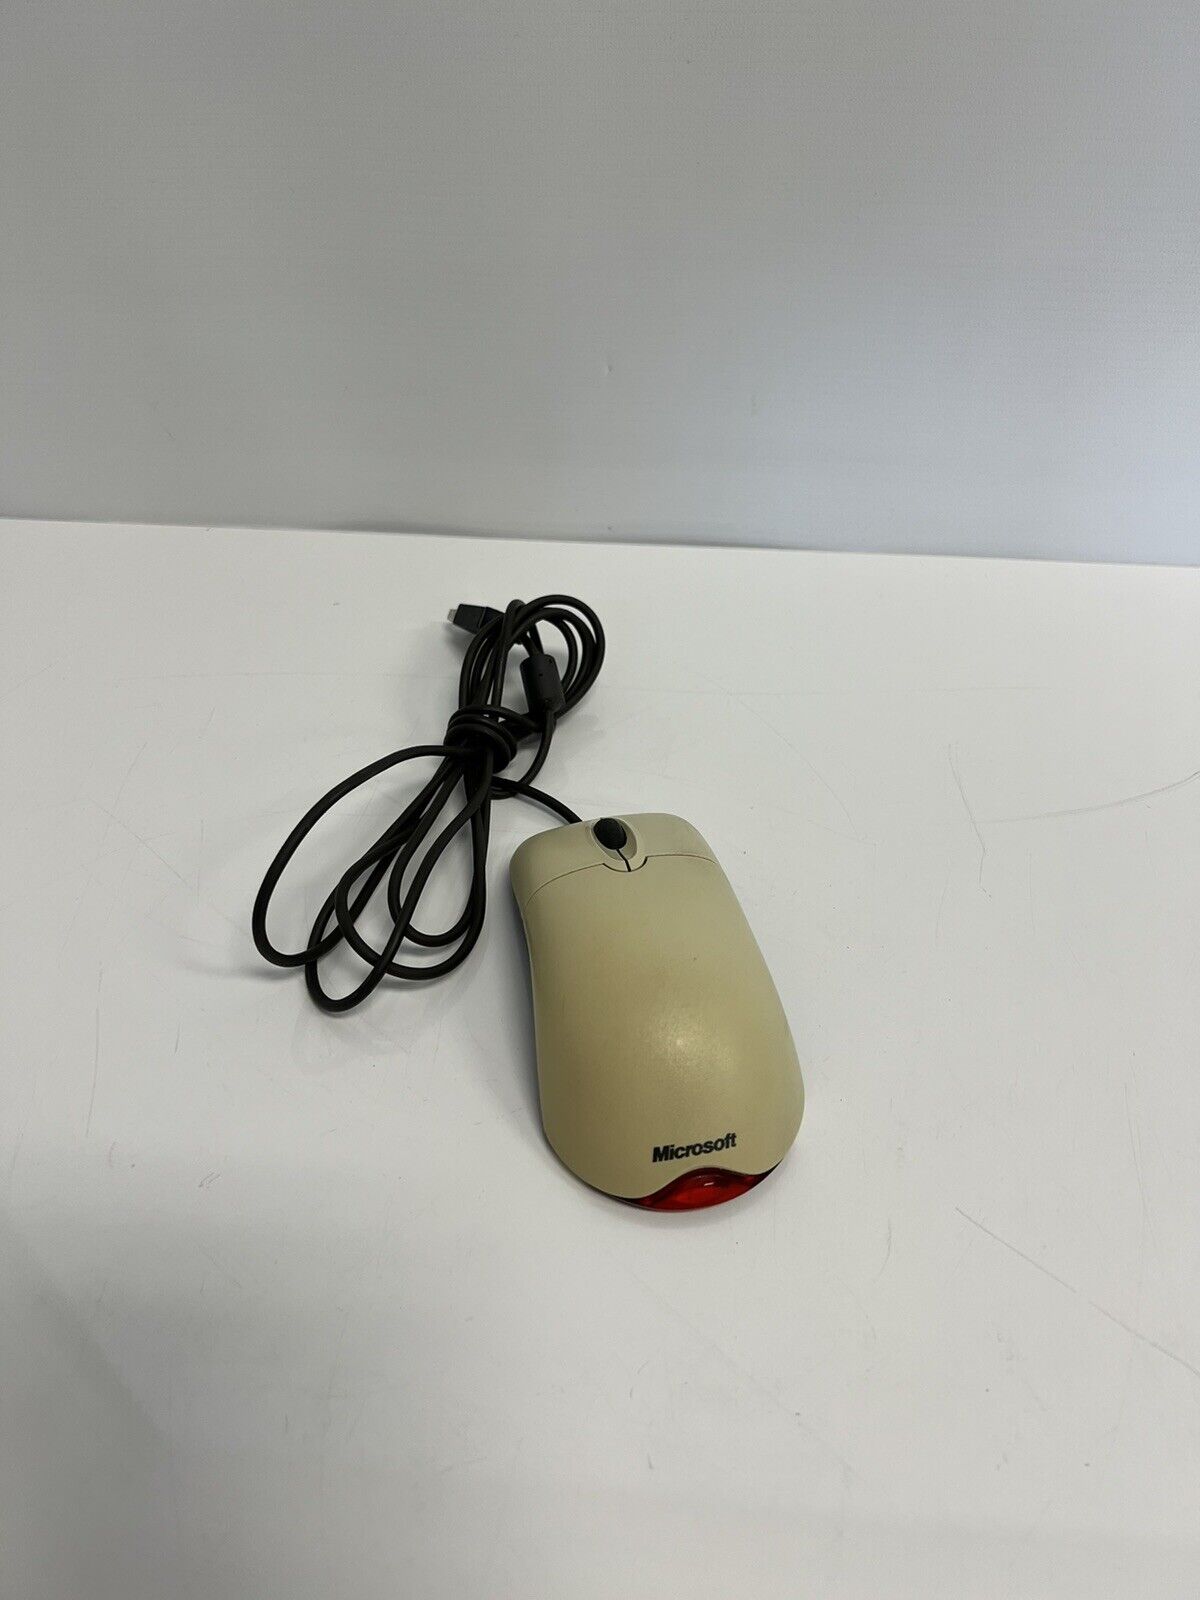 MICROSOFT Optical USB & PS/2 Compatible Wheel Mouse X08-18741 Tested & Working